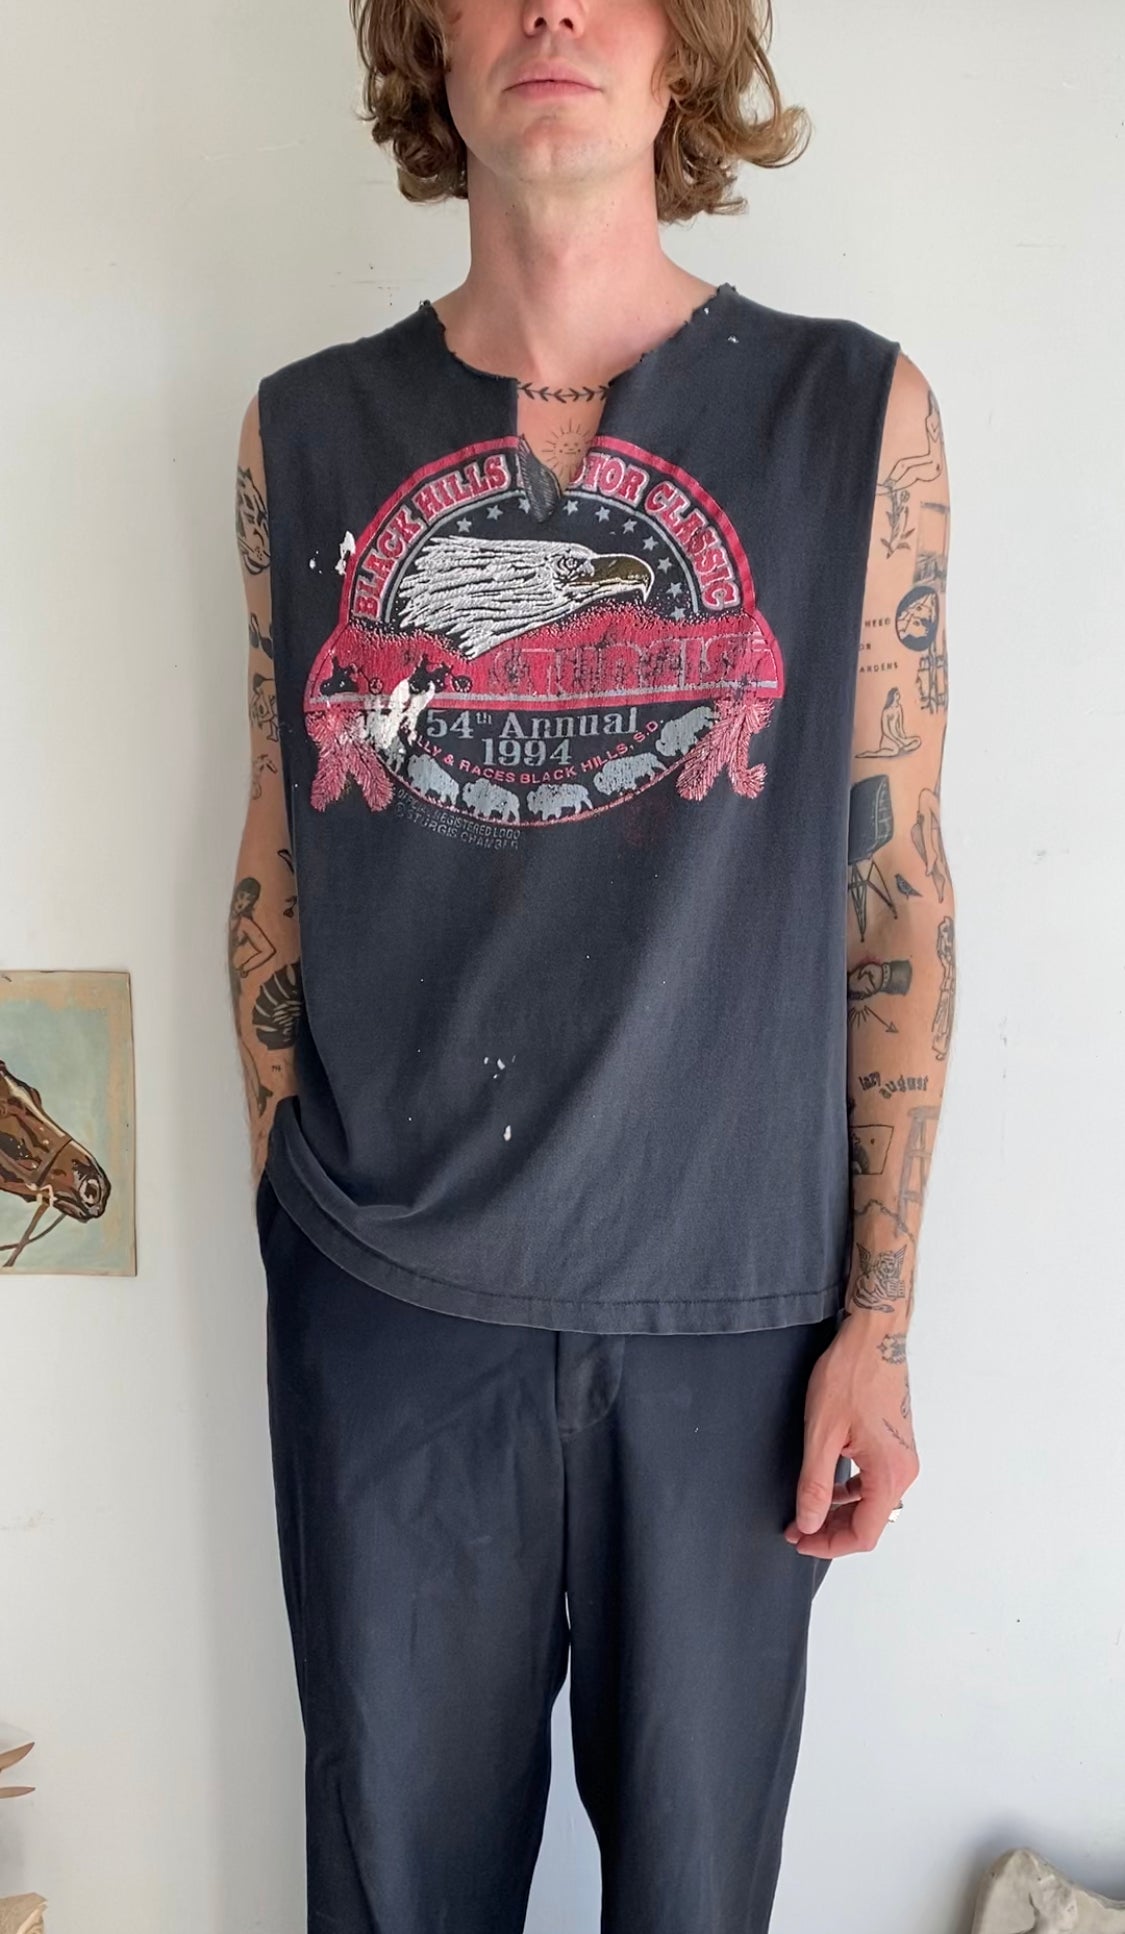 1990s Thrashed Black Hills Muscle Tee (L)